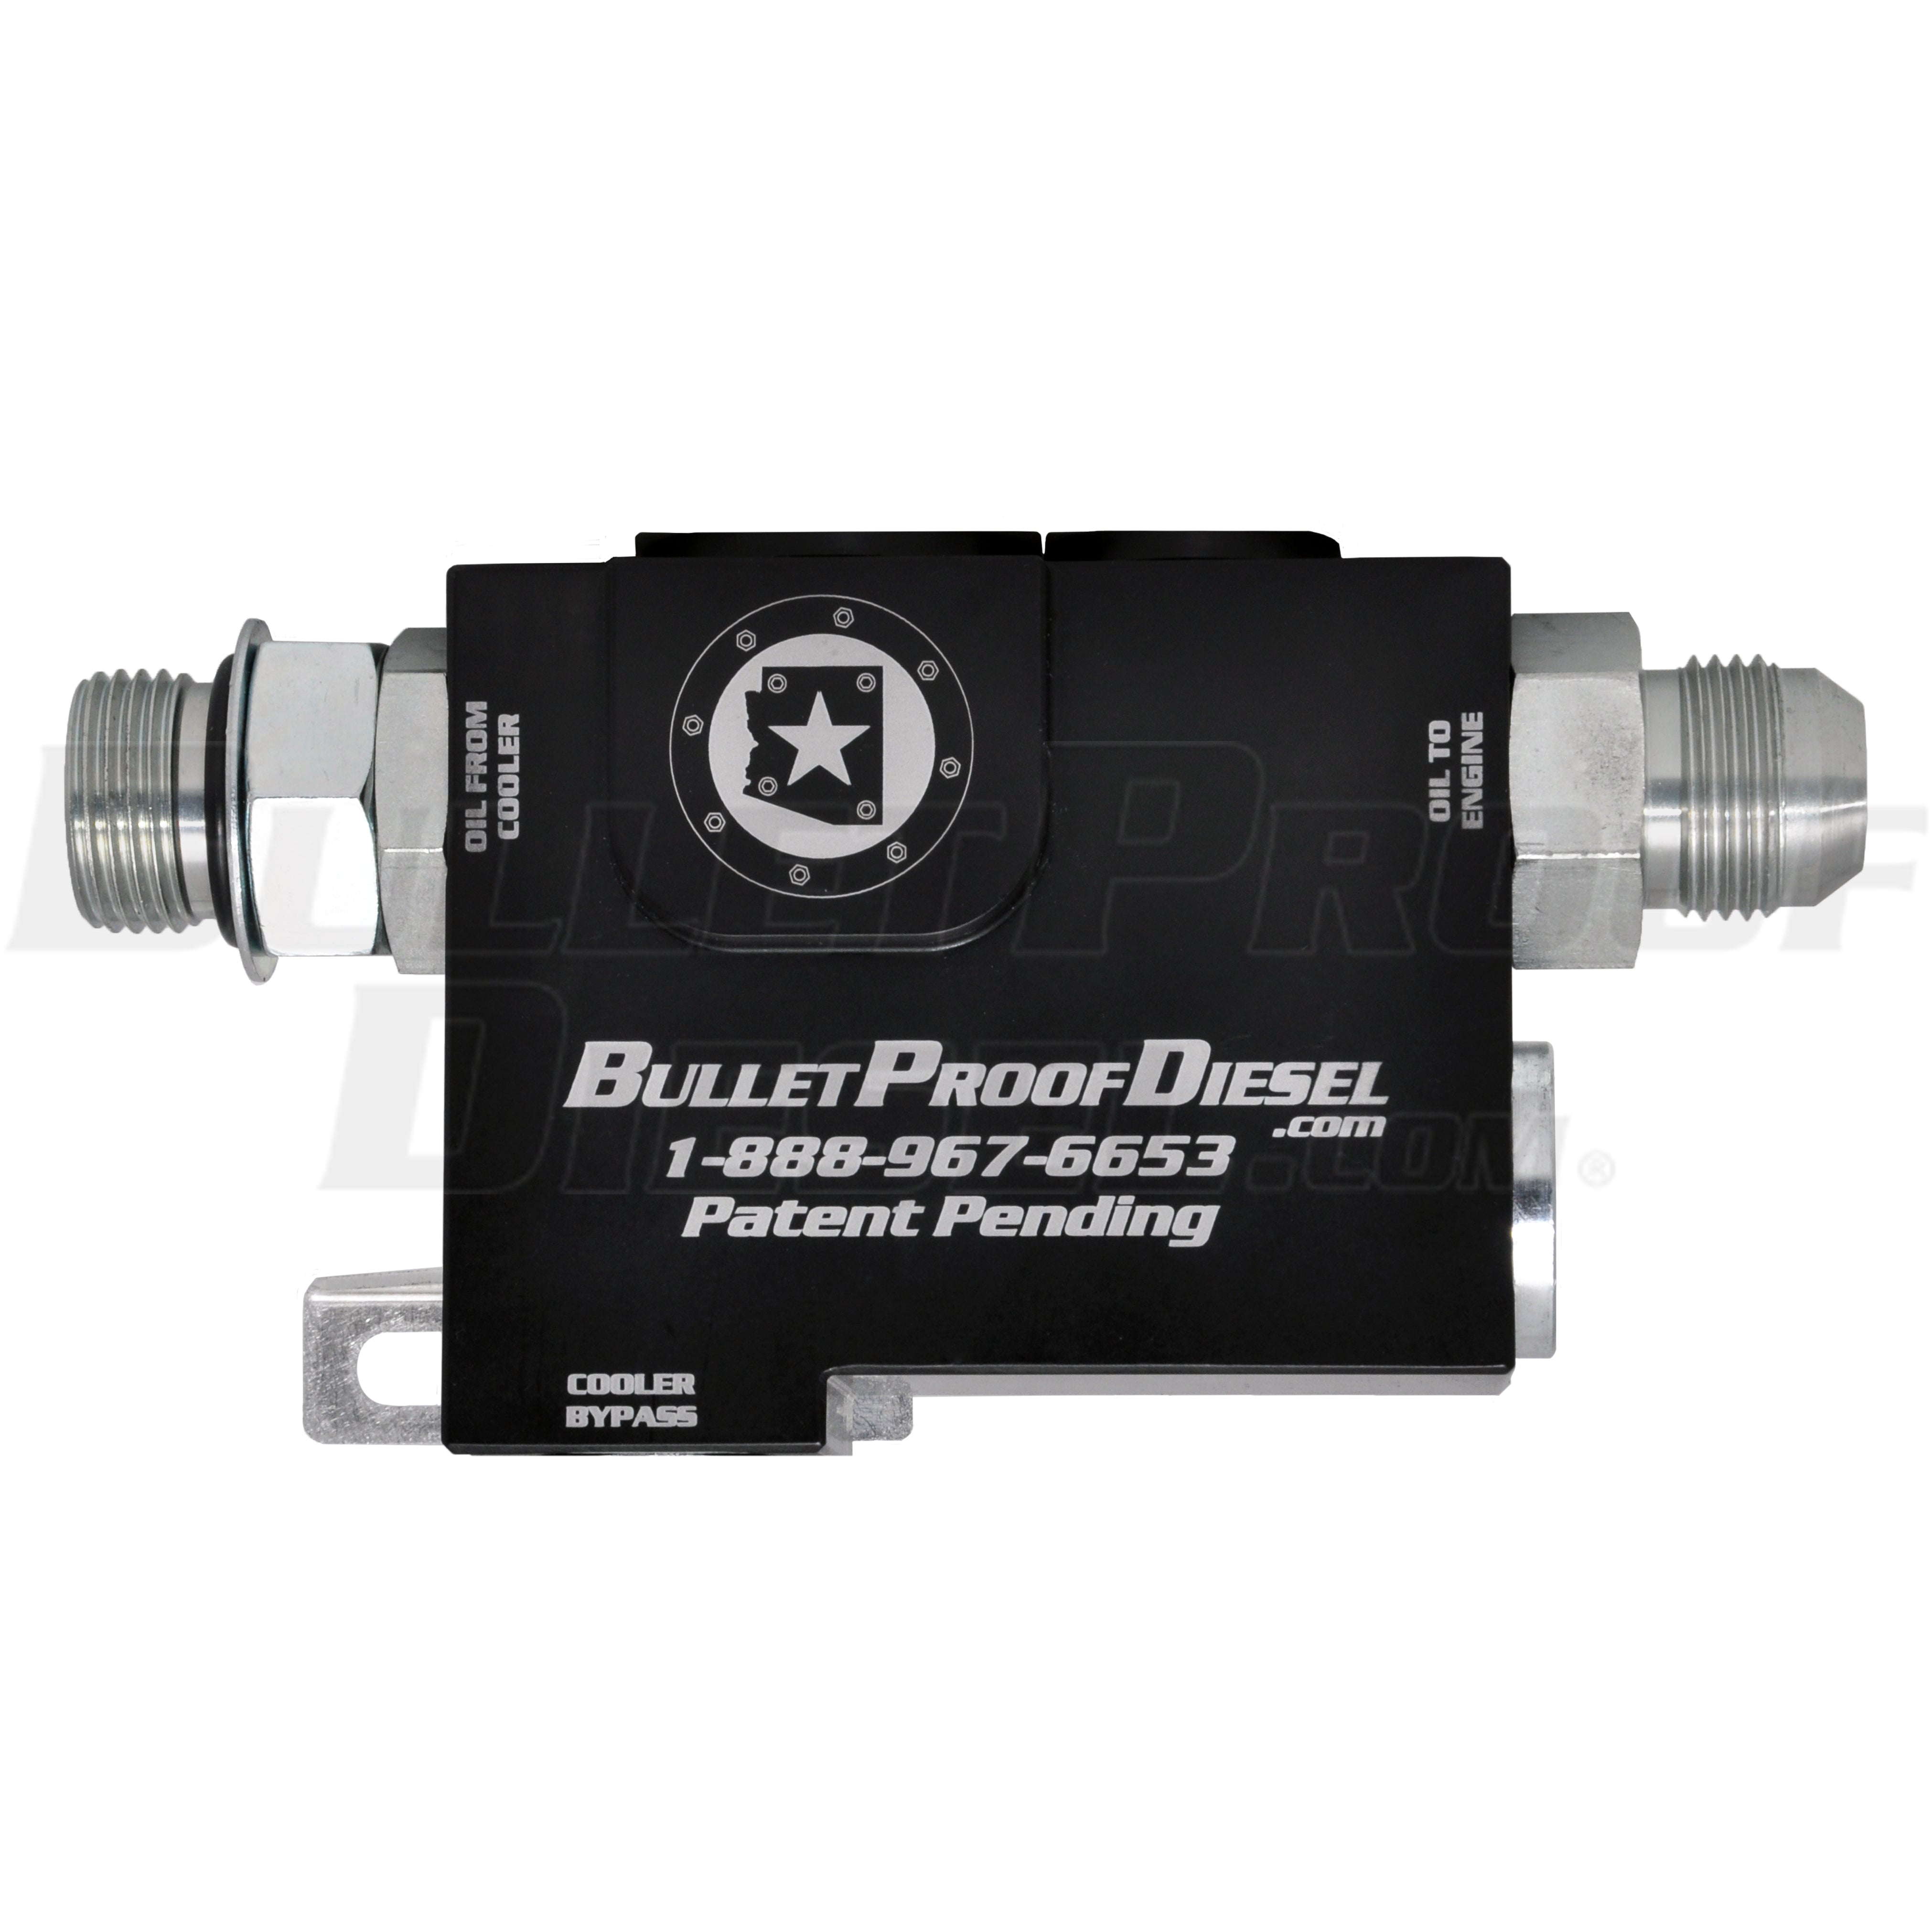 BulletProof Engine Oil System Upgrade 2005-2007 - Upgraded Oil Filtration - Heavy-Duty Air/Oil Cooling; Designed for All Climates